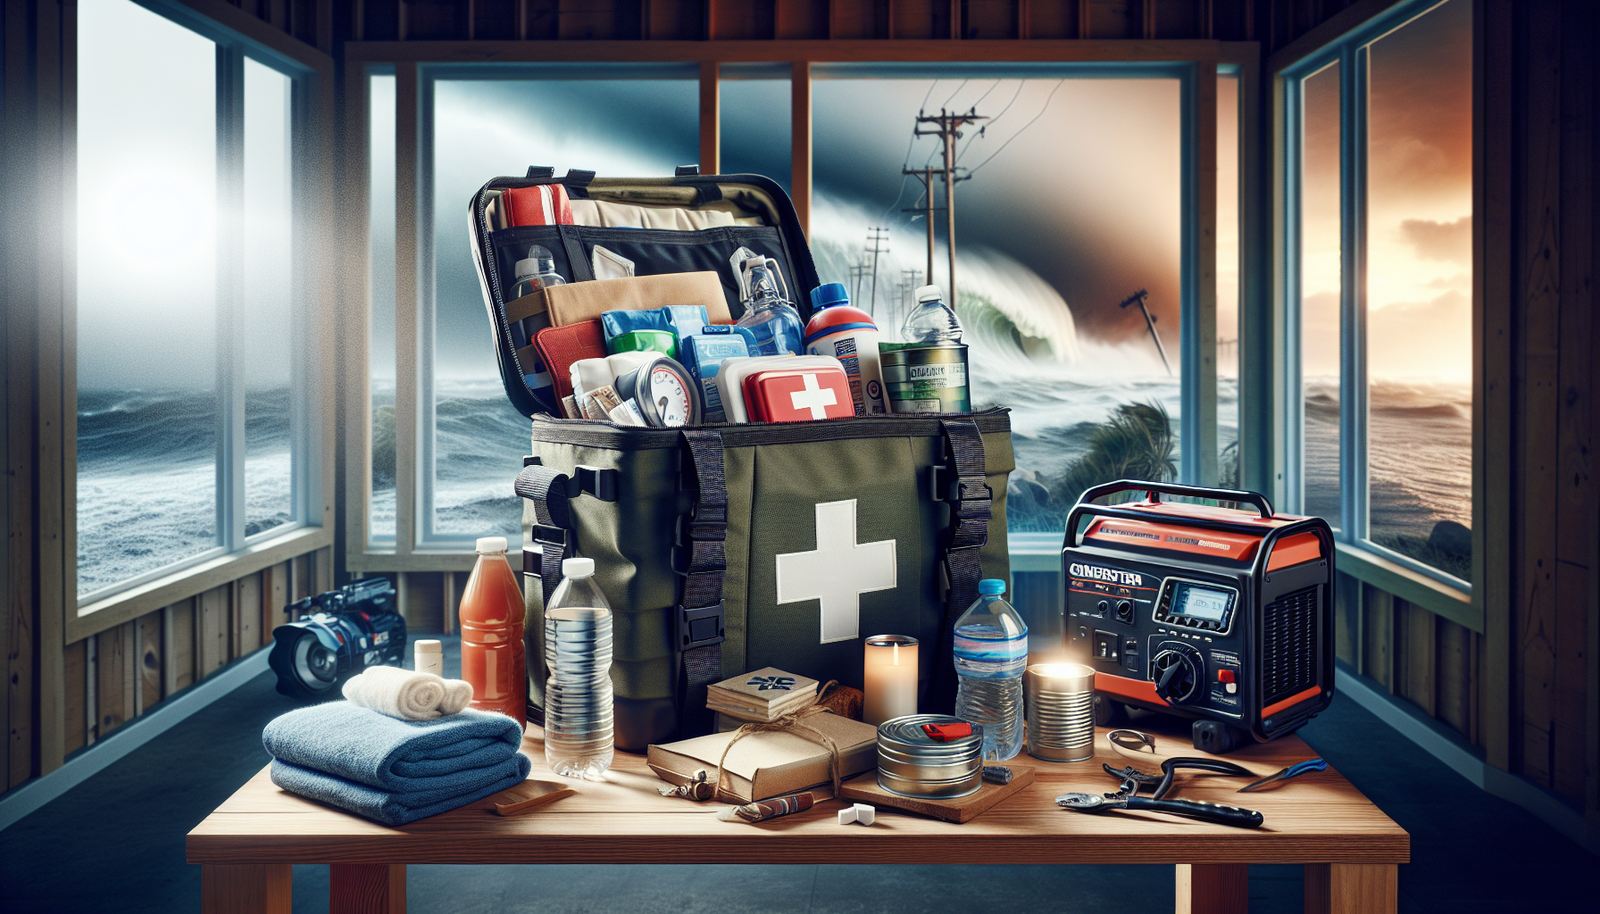 Essential Steps to Prepare Your Home for a Natural Disaster